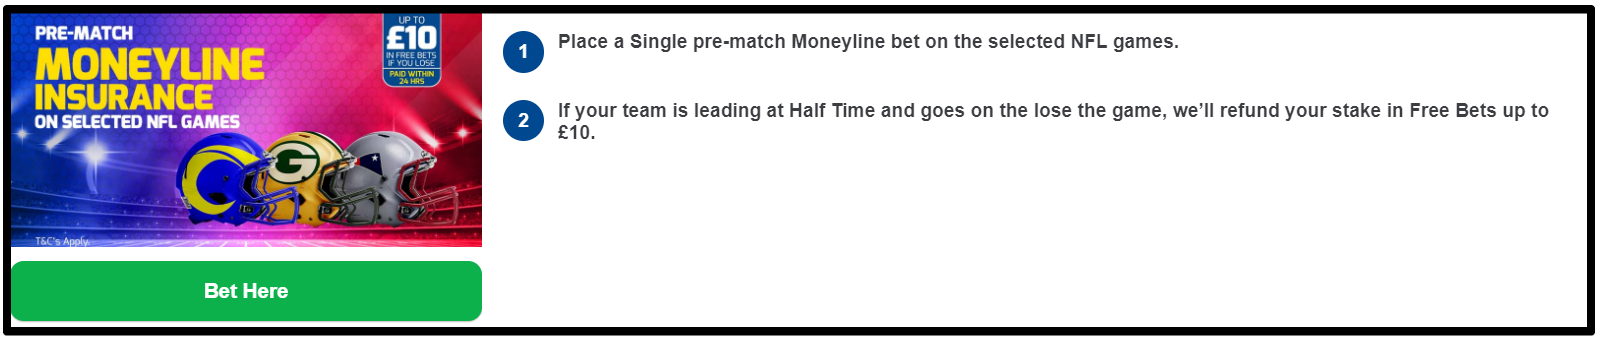 Betfred money back if your team lead at half time but go on to lose.